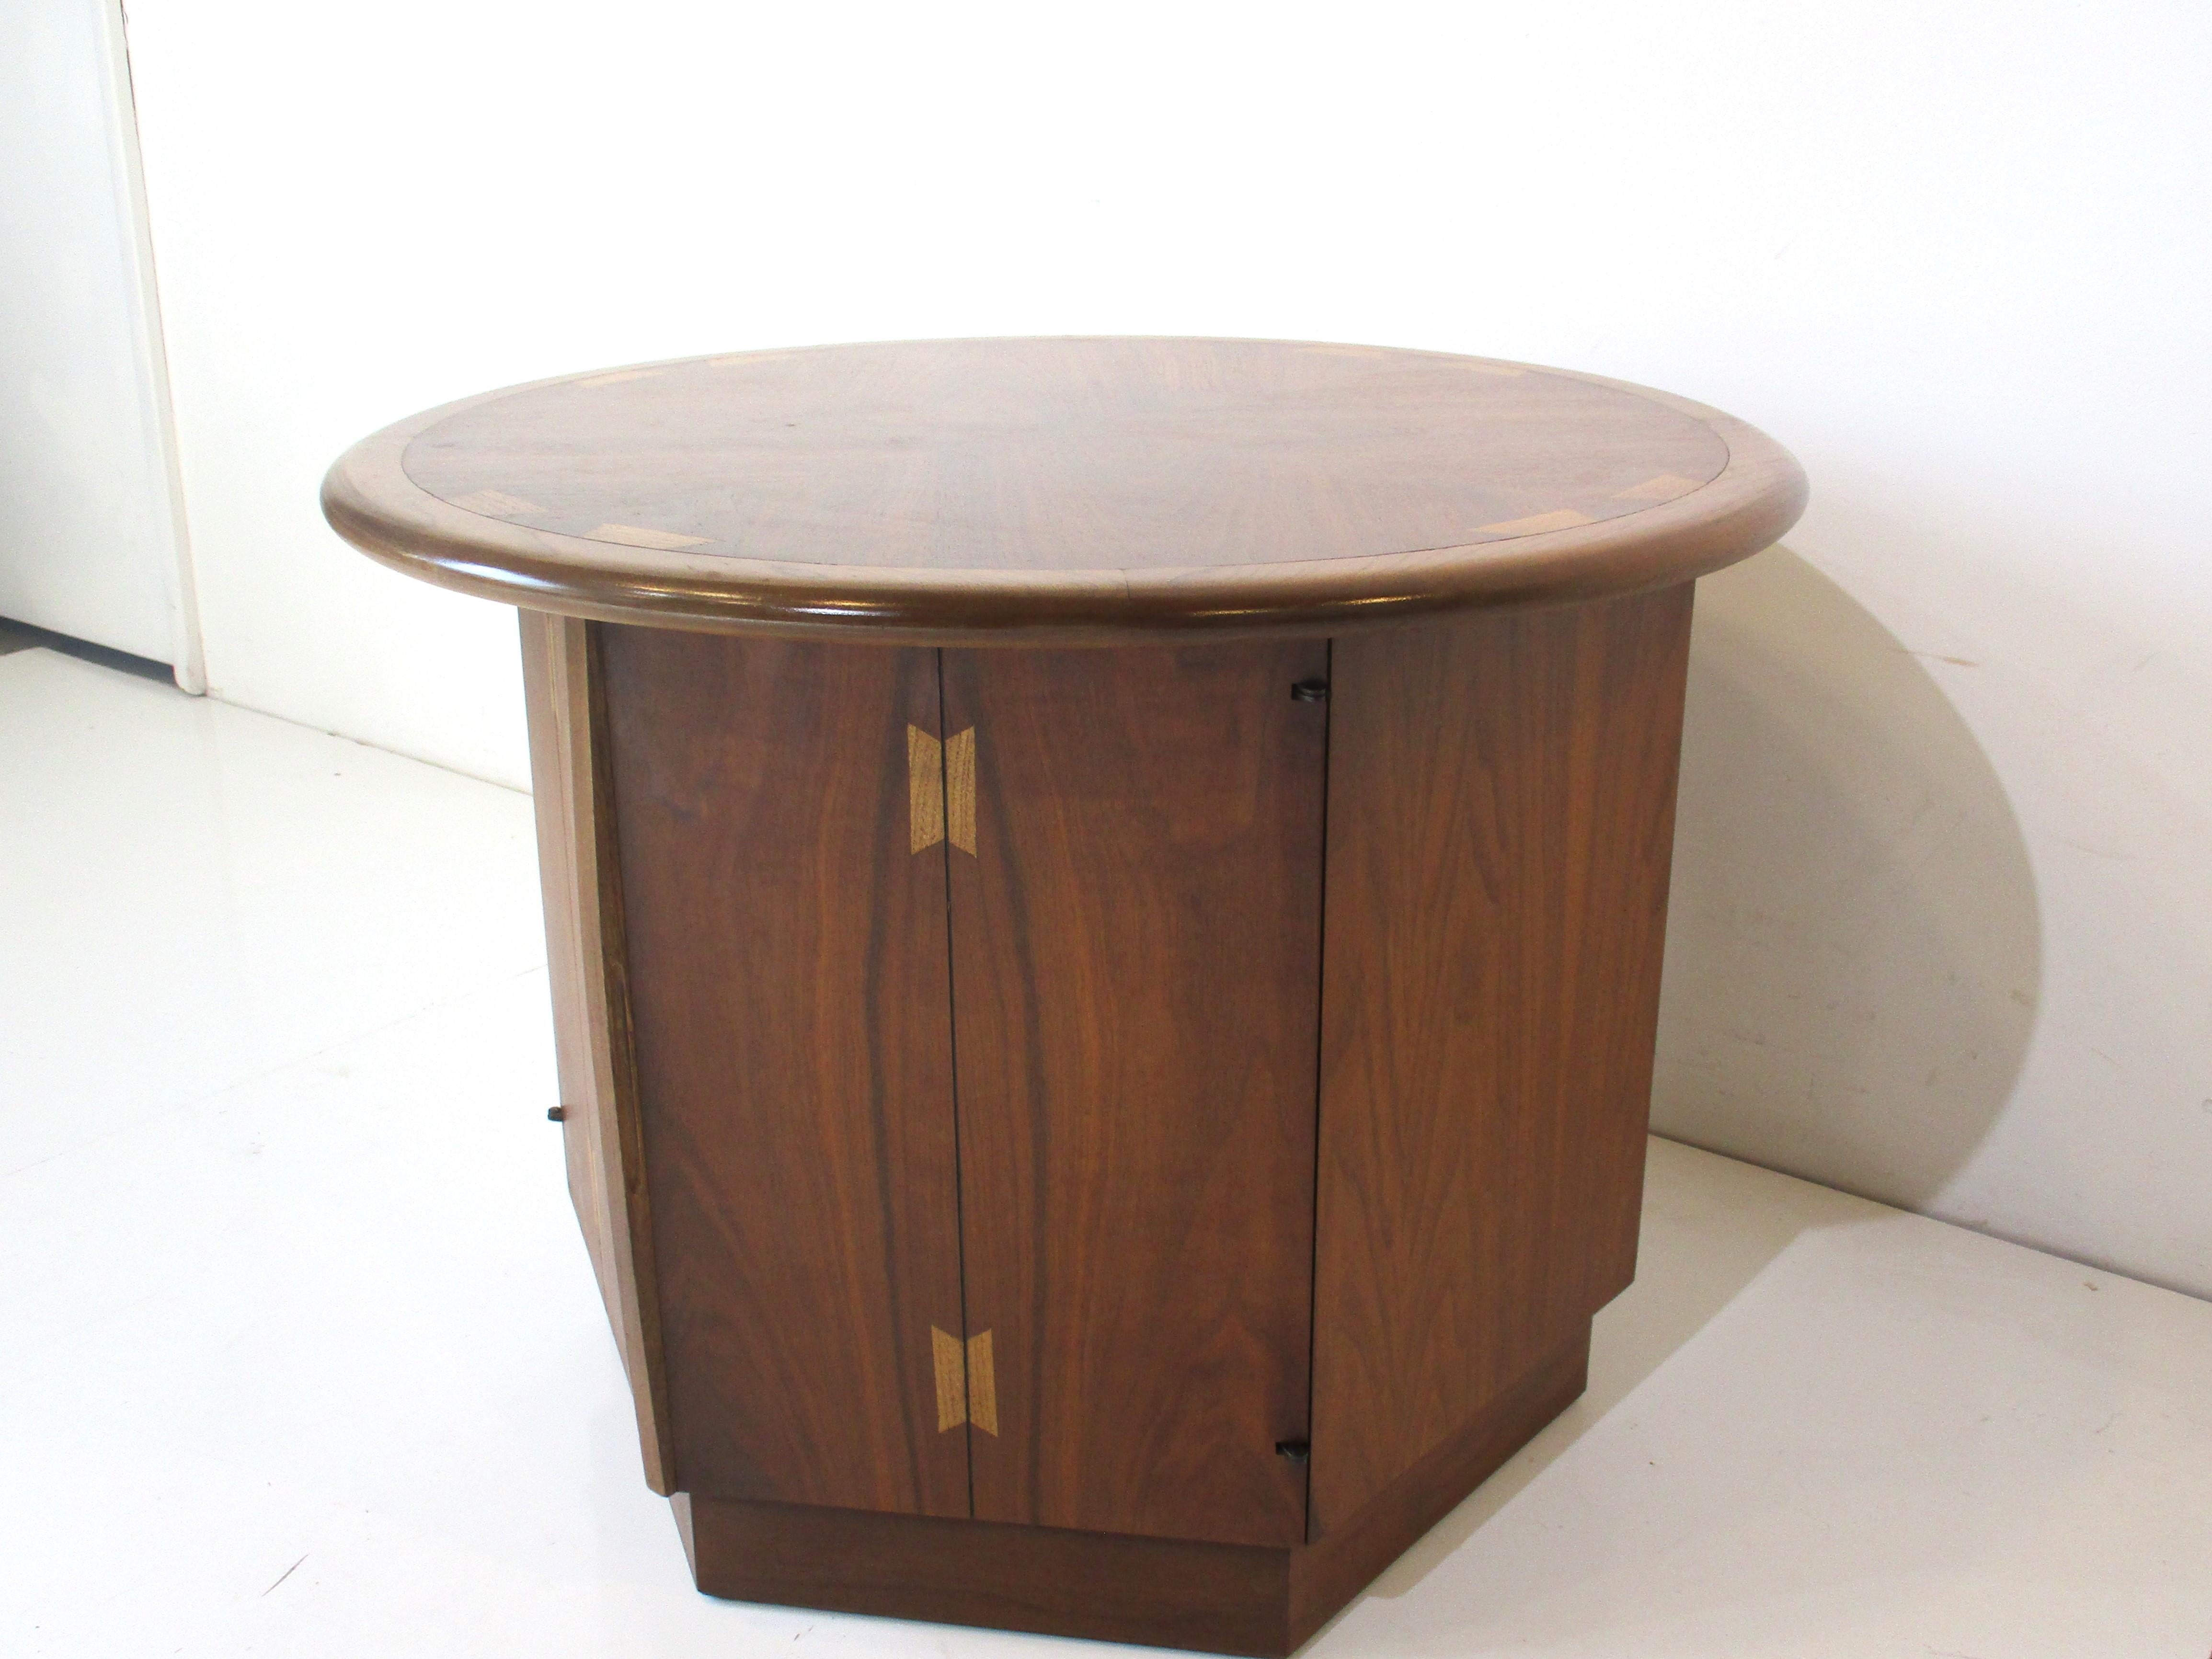 A very well crafted drum side table with wonderful wood graining and to the top book matched walnut with contrasting dovetail detail. The side has a small handle to access the storage area inside with the outside having bowties to the corner edges.